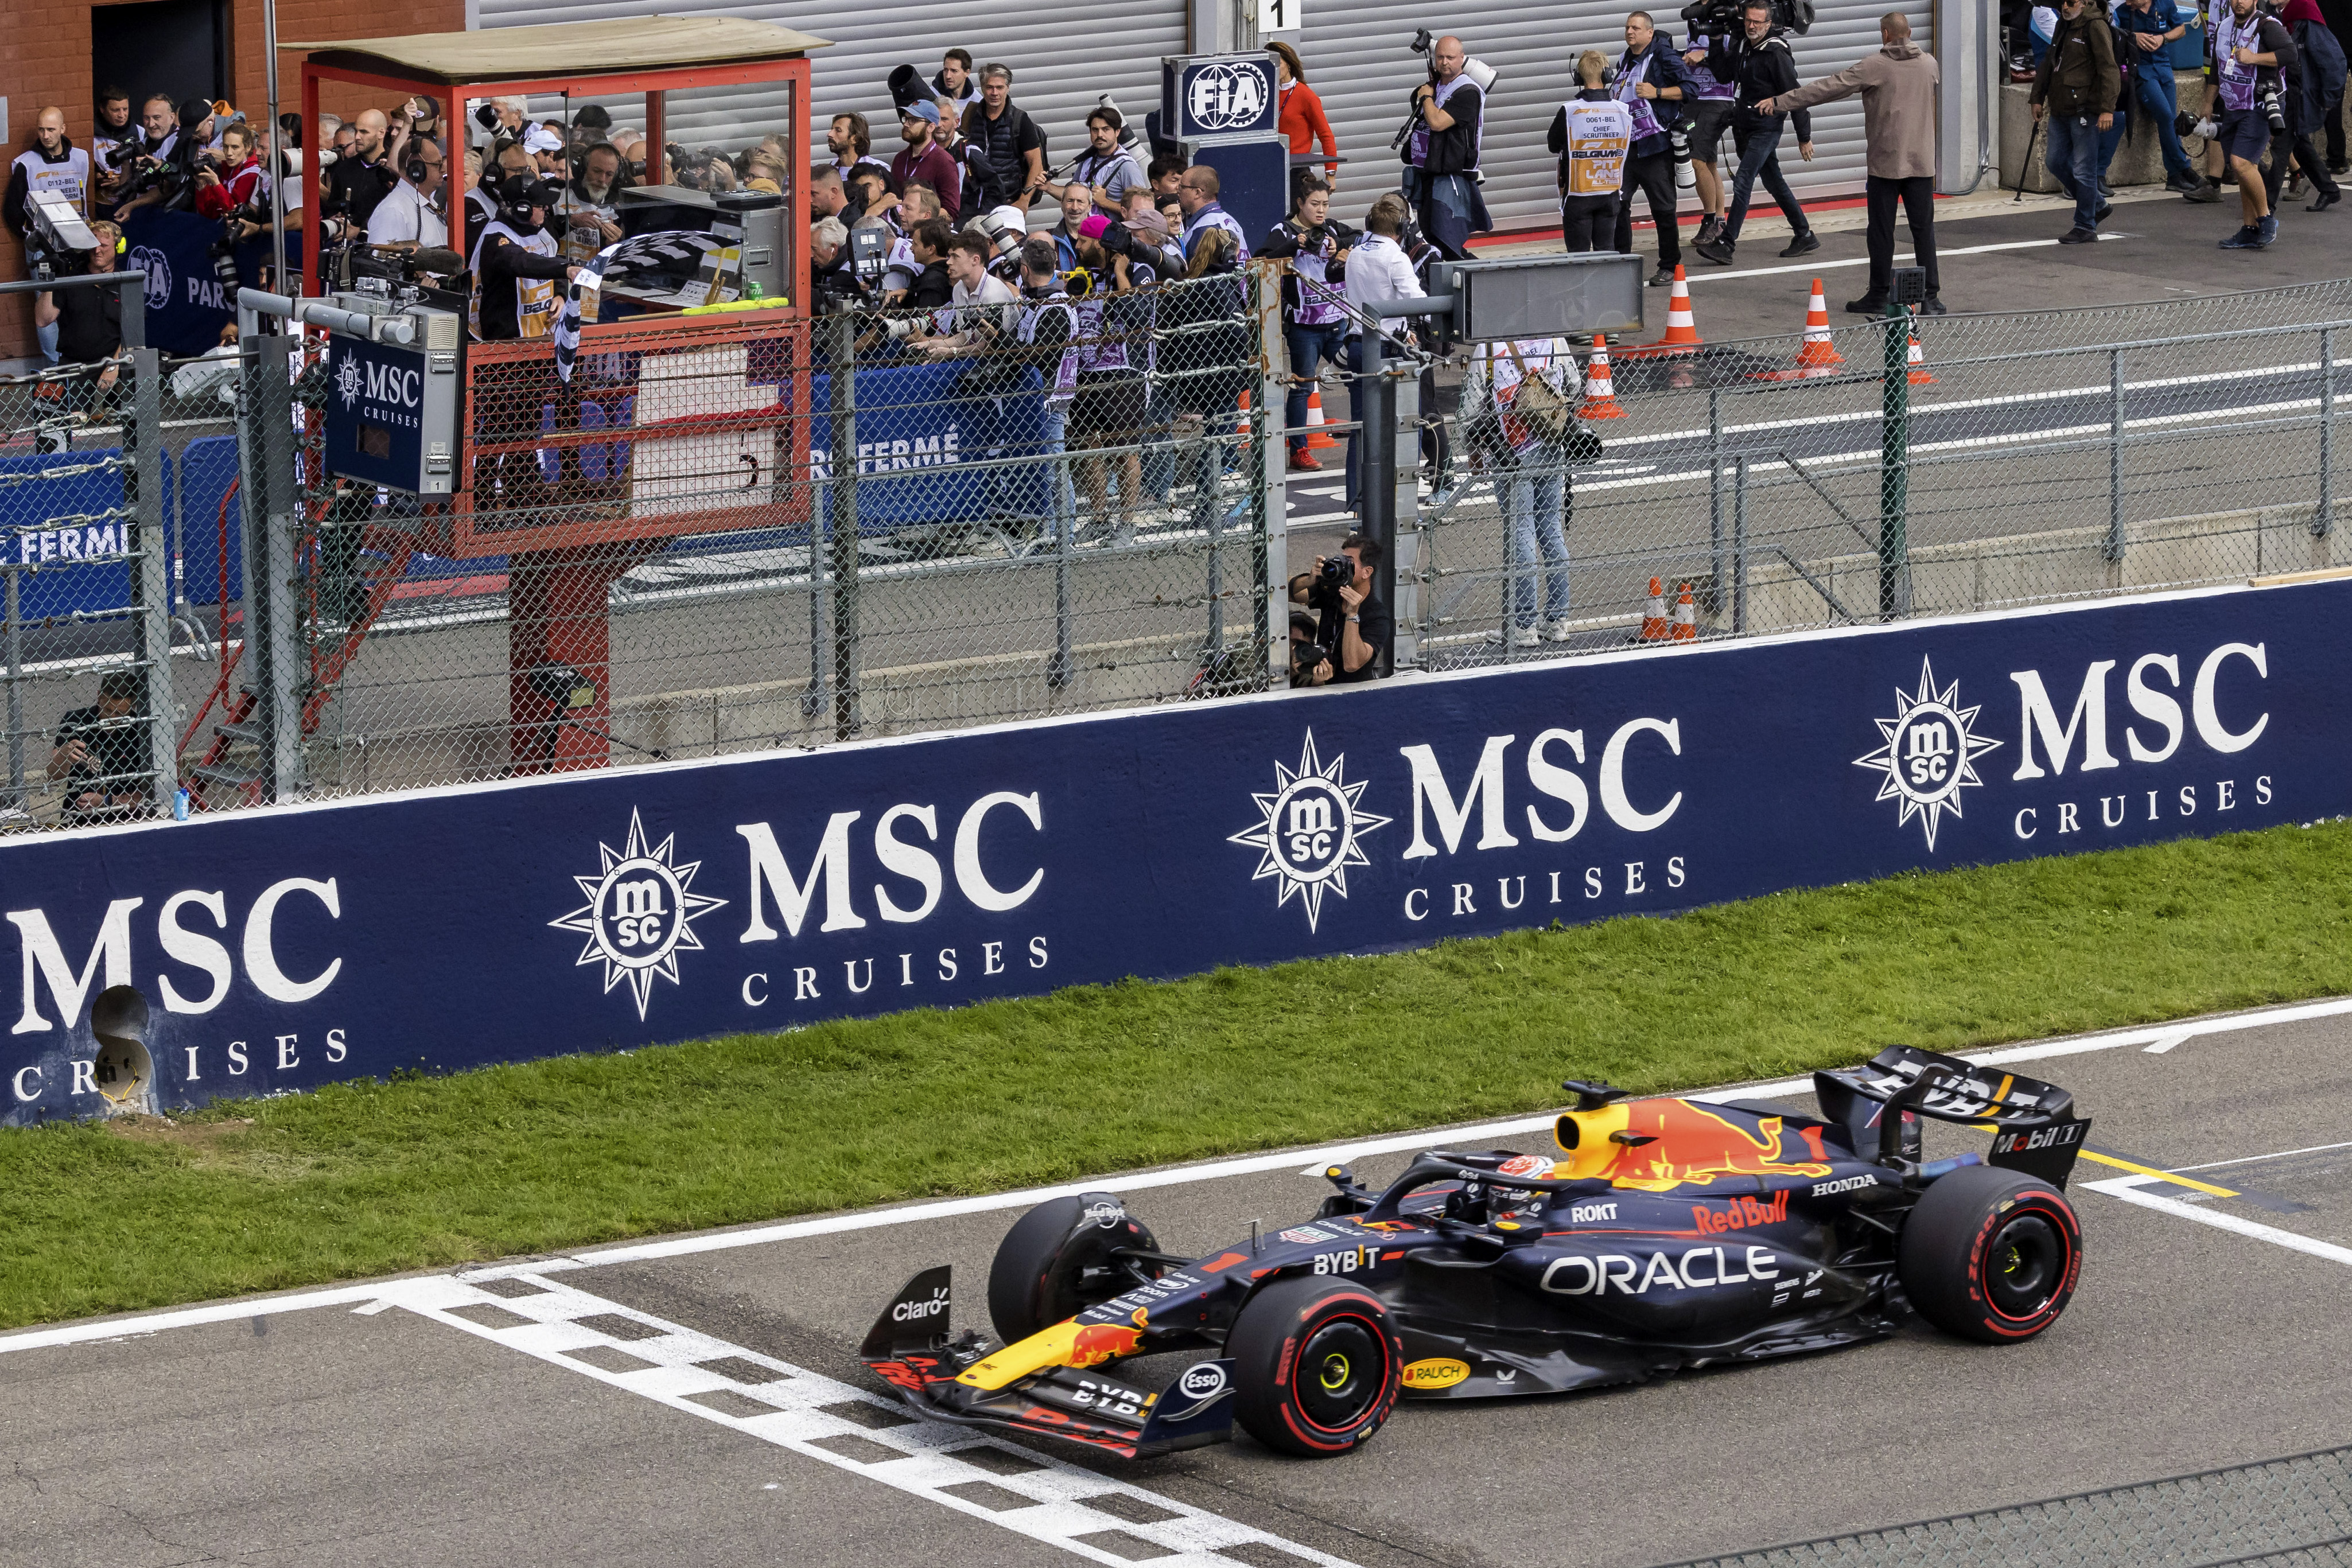 How to Watch the 2023 Dutch Grand Prix - Formula 1 Channel, Stream, Preview